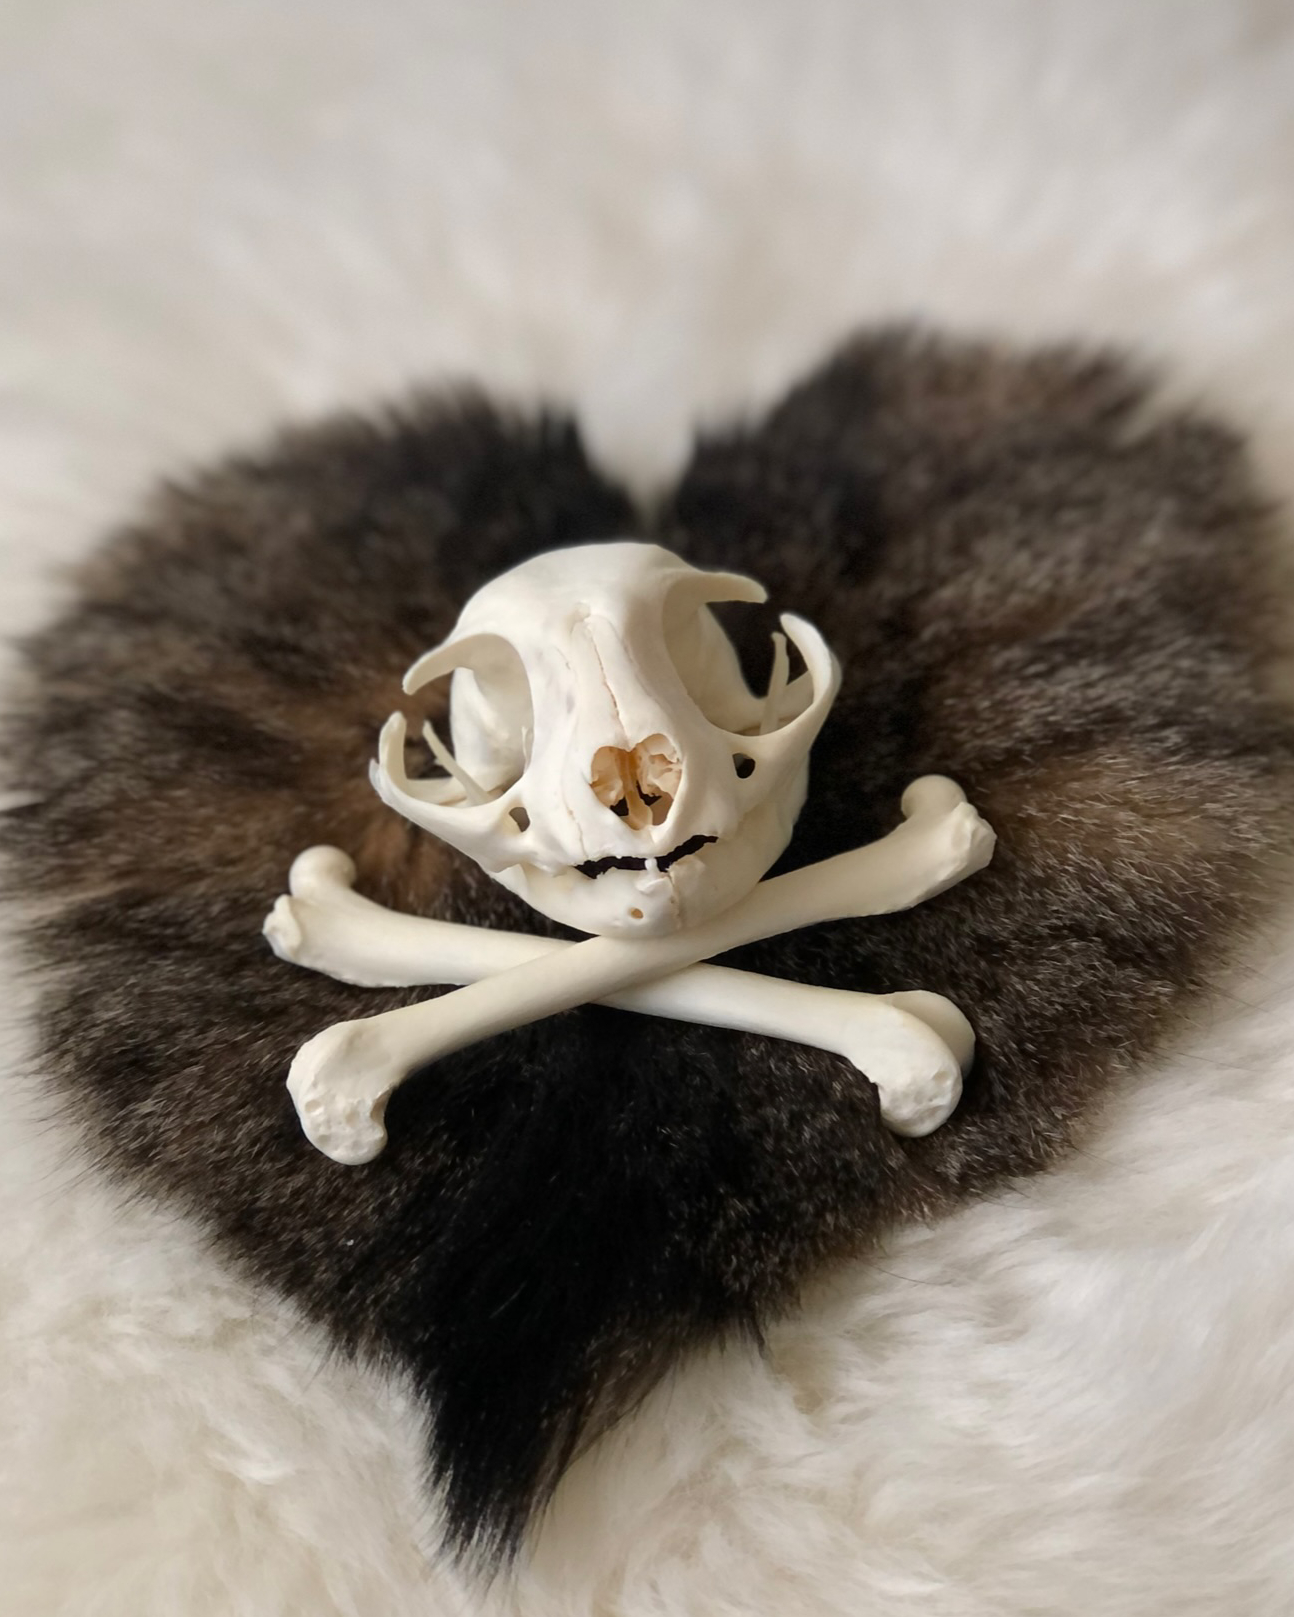 Cat skull without teeth and bones arranged in front of it in an x. They're placed on top of a heart-shaped fur preservation.